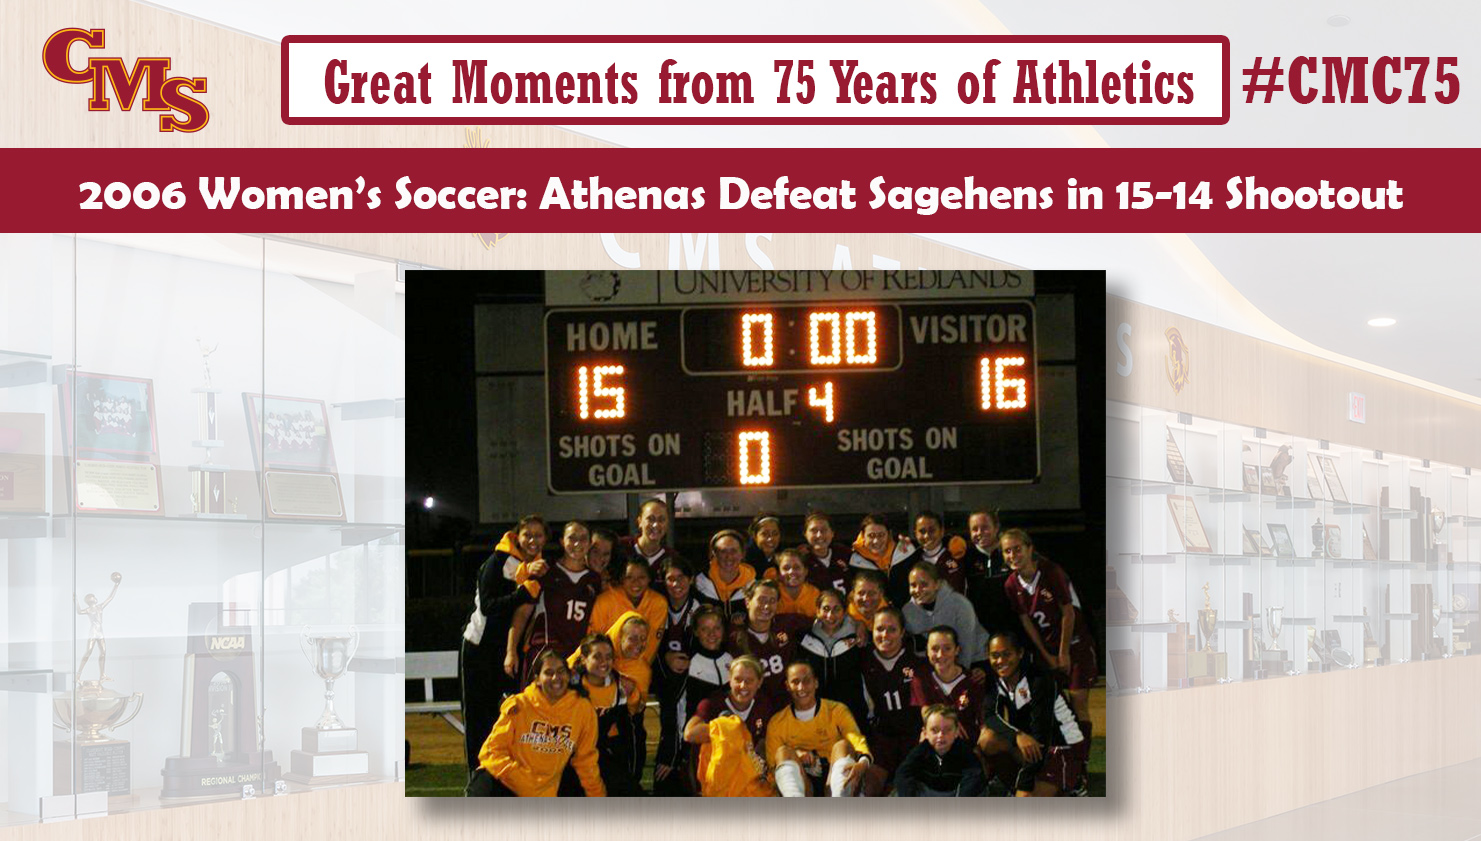 CMS women's soccer celebrating under the scoreboard after the 2006 win. Words over the photo read: Great Moments from 75 Years of Athletics, 2006 Women's Soccer: Athenas Defeat Sagehens in 15-14 Shootout